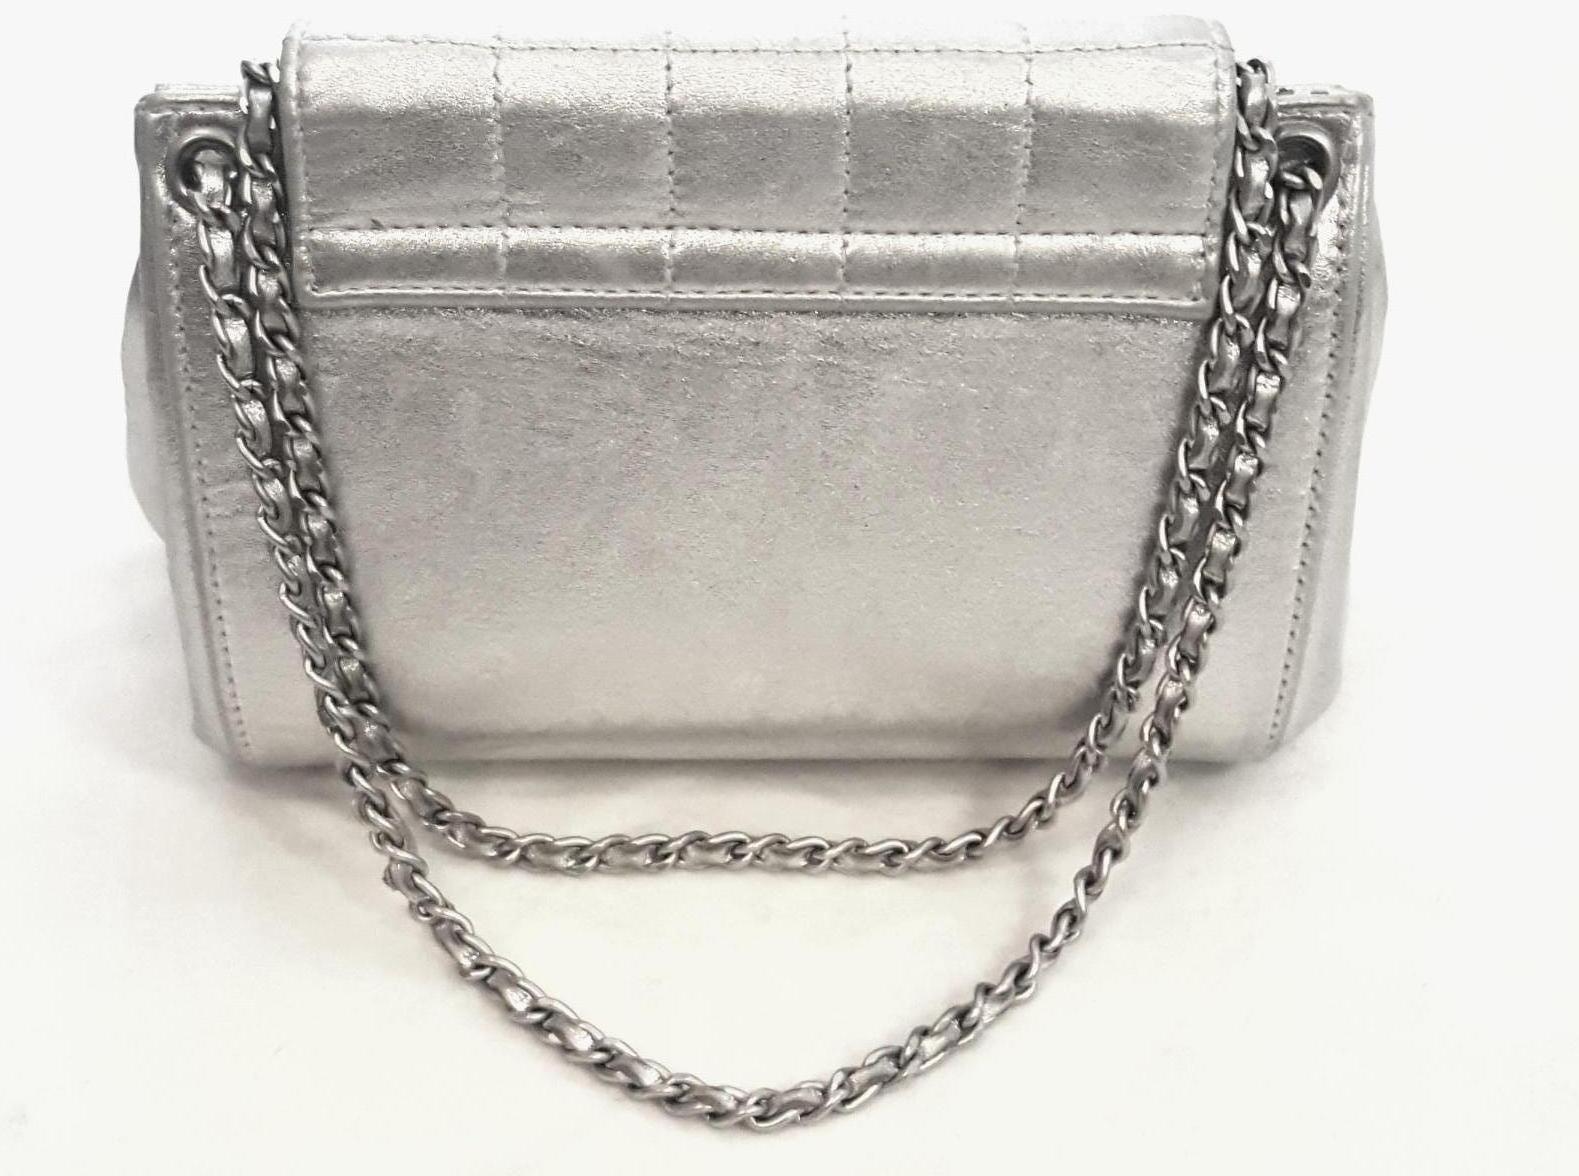 Women's Chanel Mademoiselle Silver Metallic Square Quilt Chain Link Strap Mini Bag For Sale